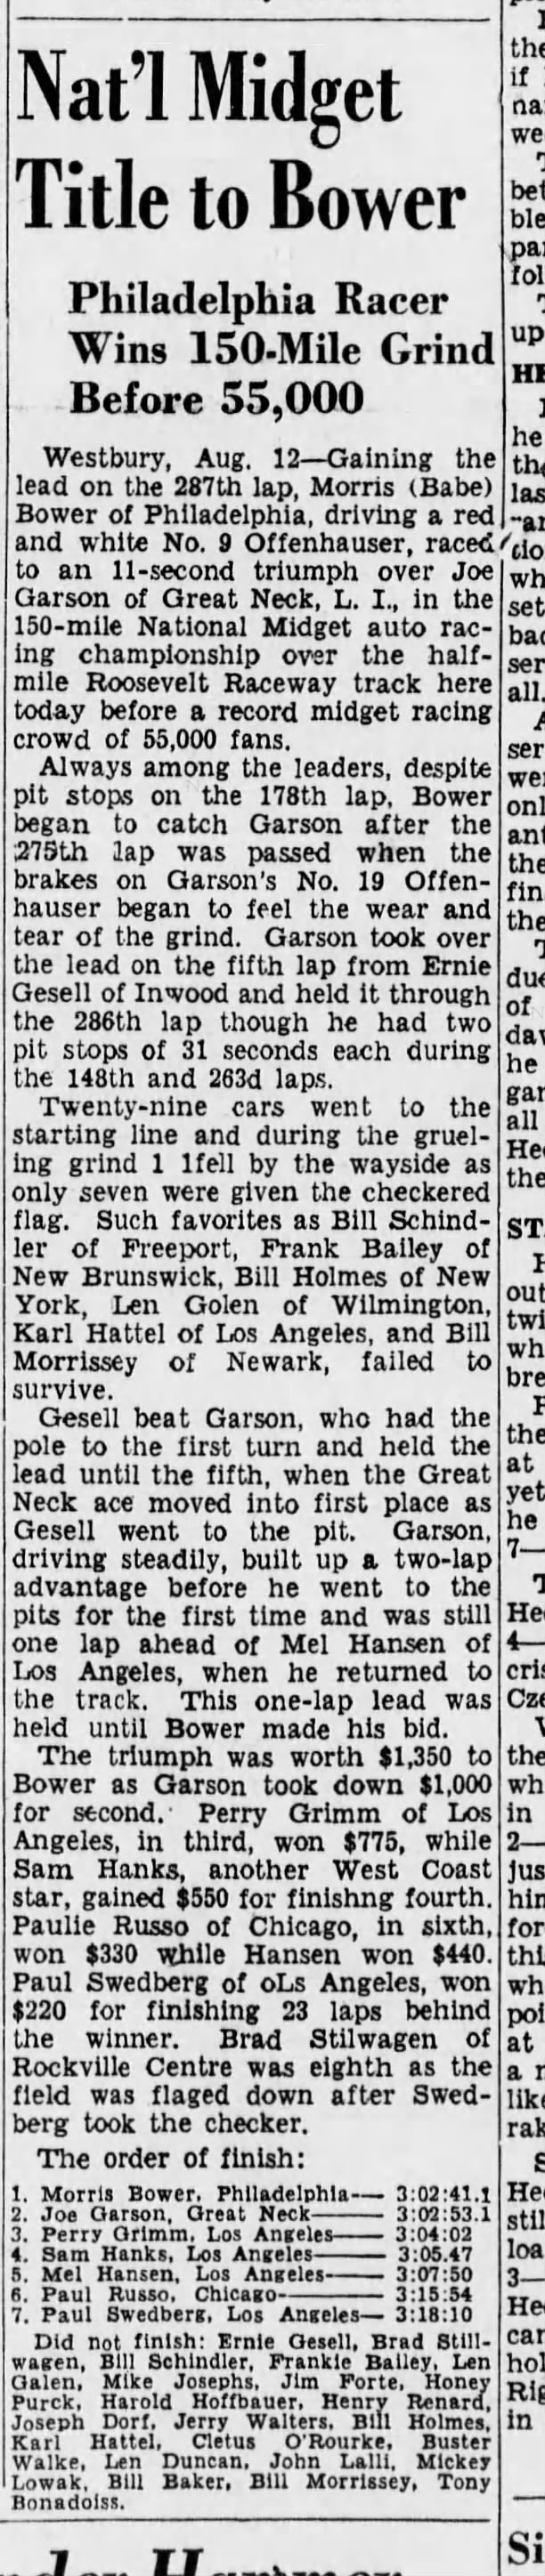 "Nat'l Midget Title to Bower," Brooklyn Daily Eagle, 13 Aug 1939, 31.